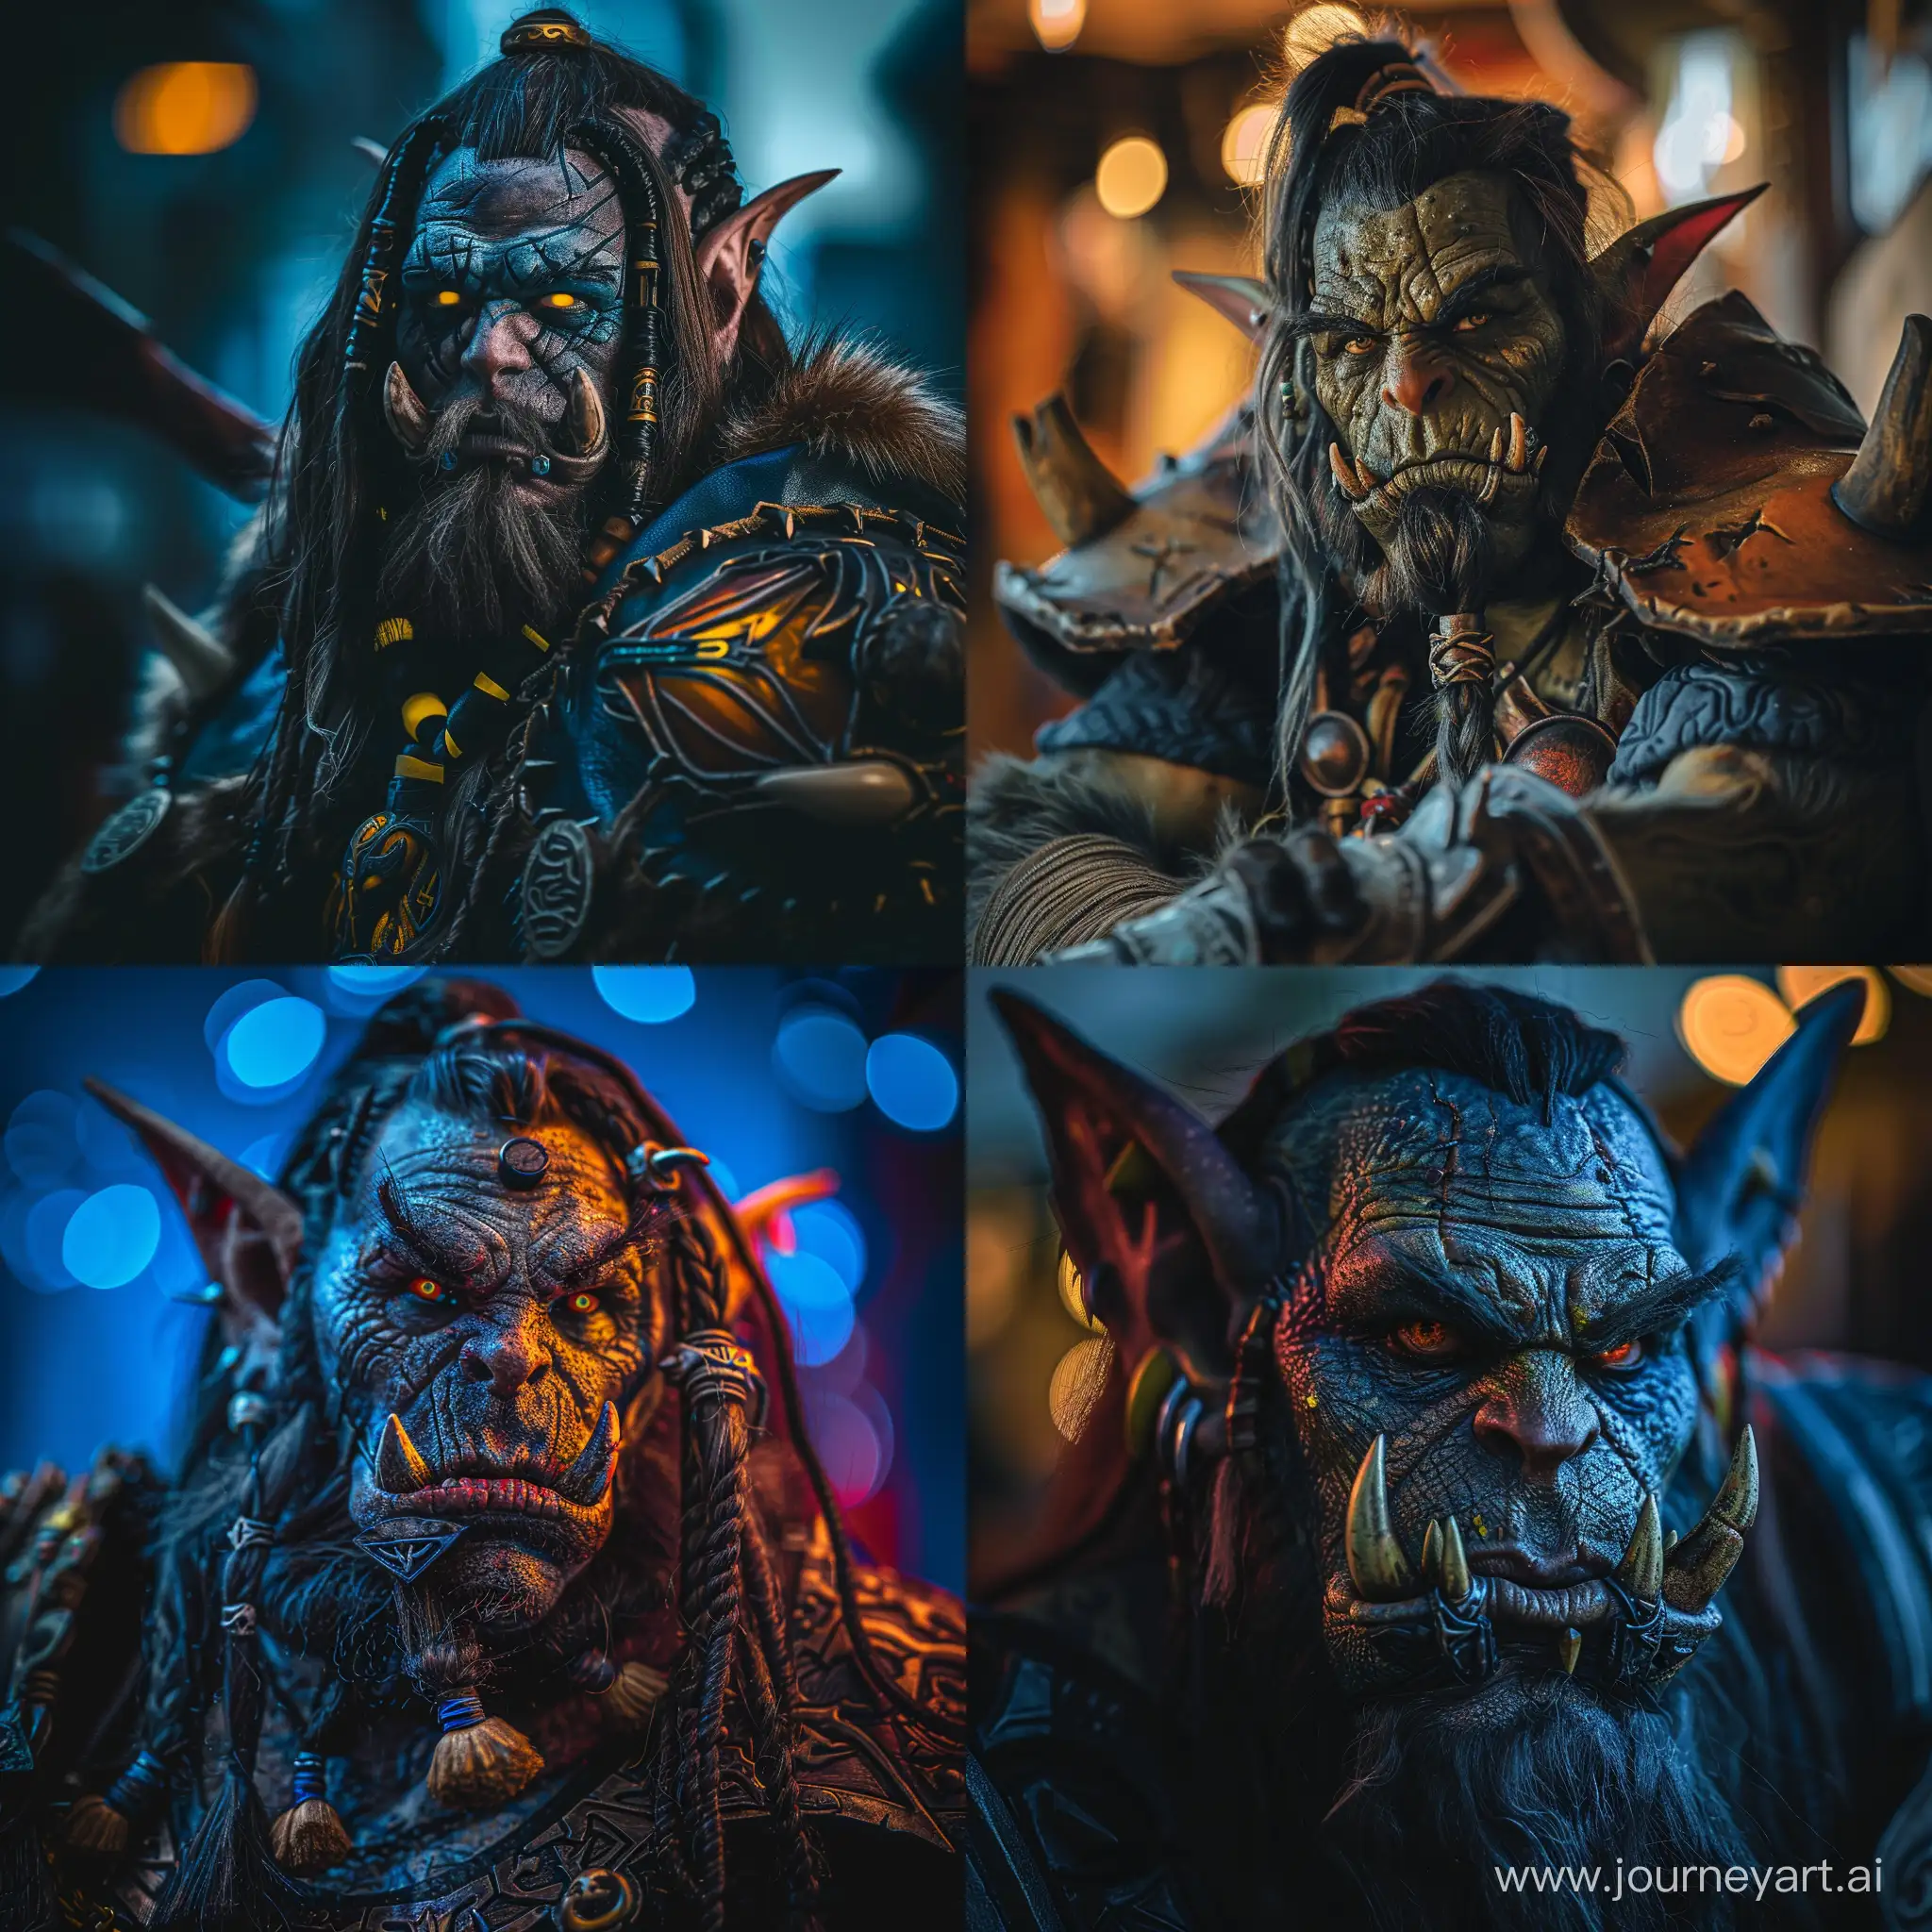 world of warcraft vol'jin character, hyber detailed, portrait photo. use sony a7 II camera with an 30mm lens fat F.1.2 aperture setting to blur the background and isolate the subject. use distinctive lighting on the subjects shot. The image should be shot in ultra-high resolution. --v 6